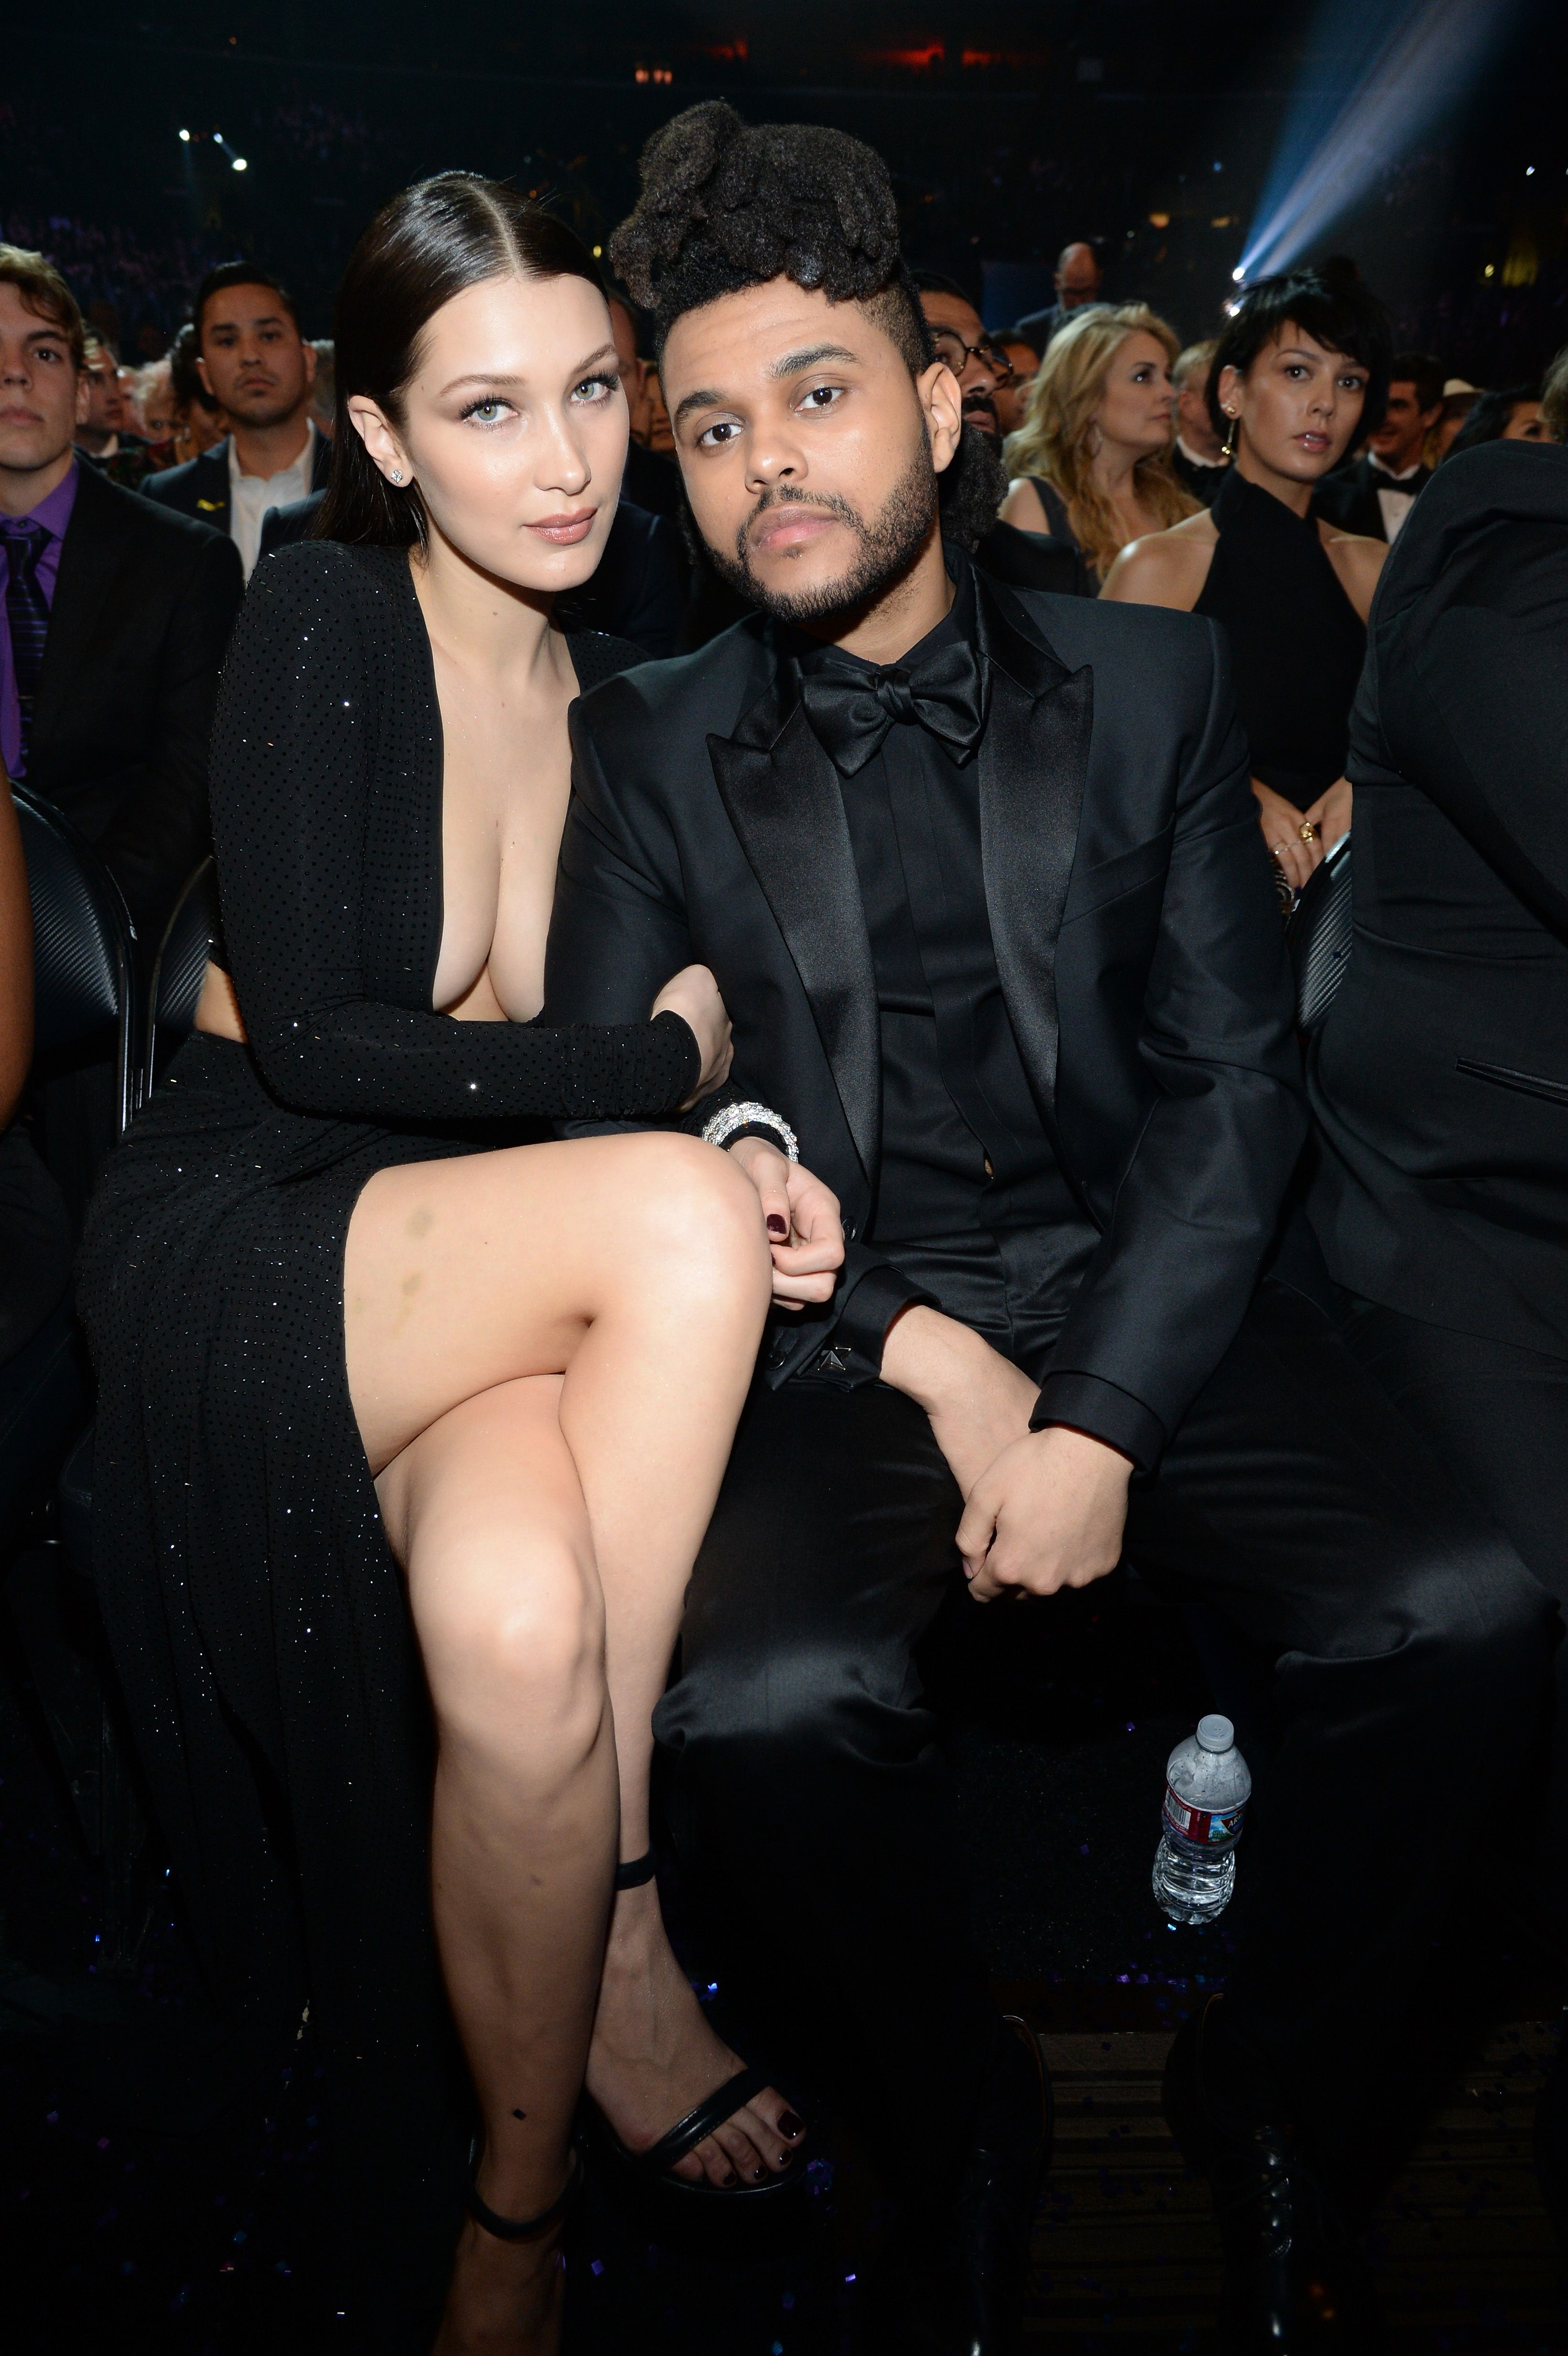 The weeknd dating